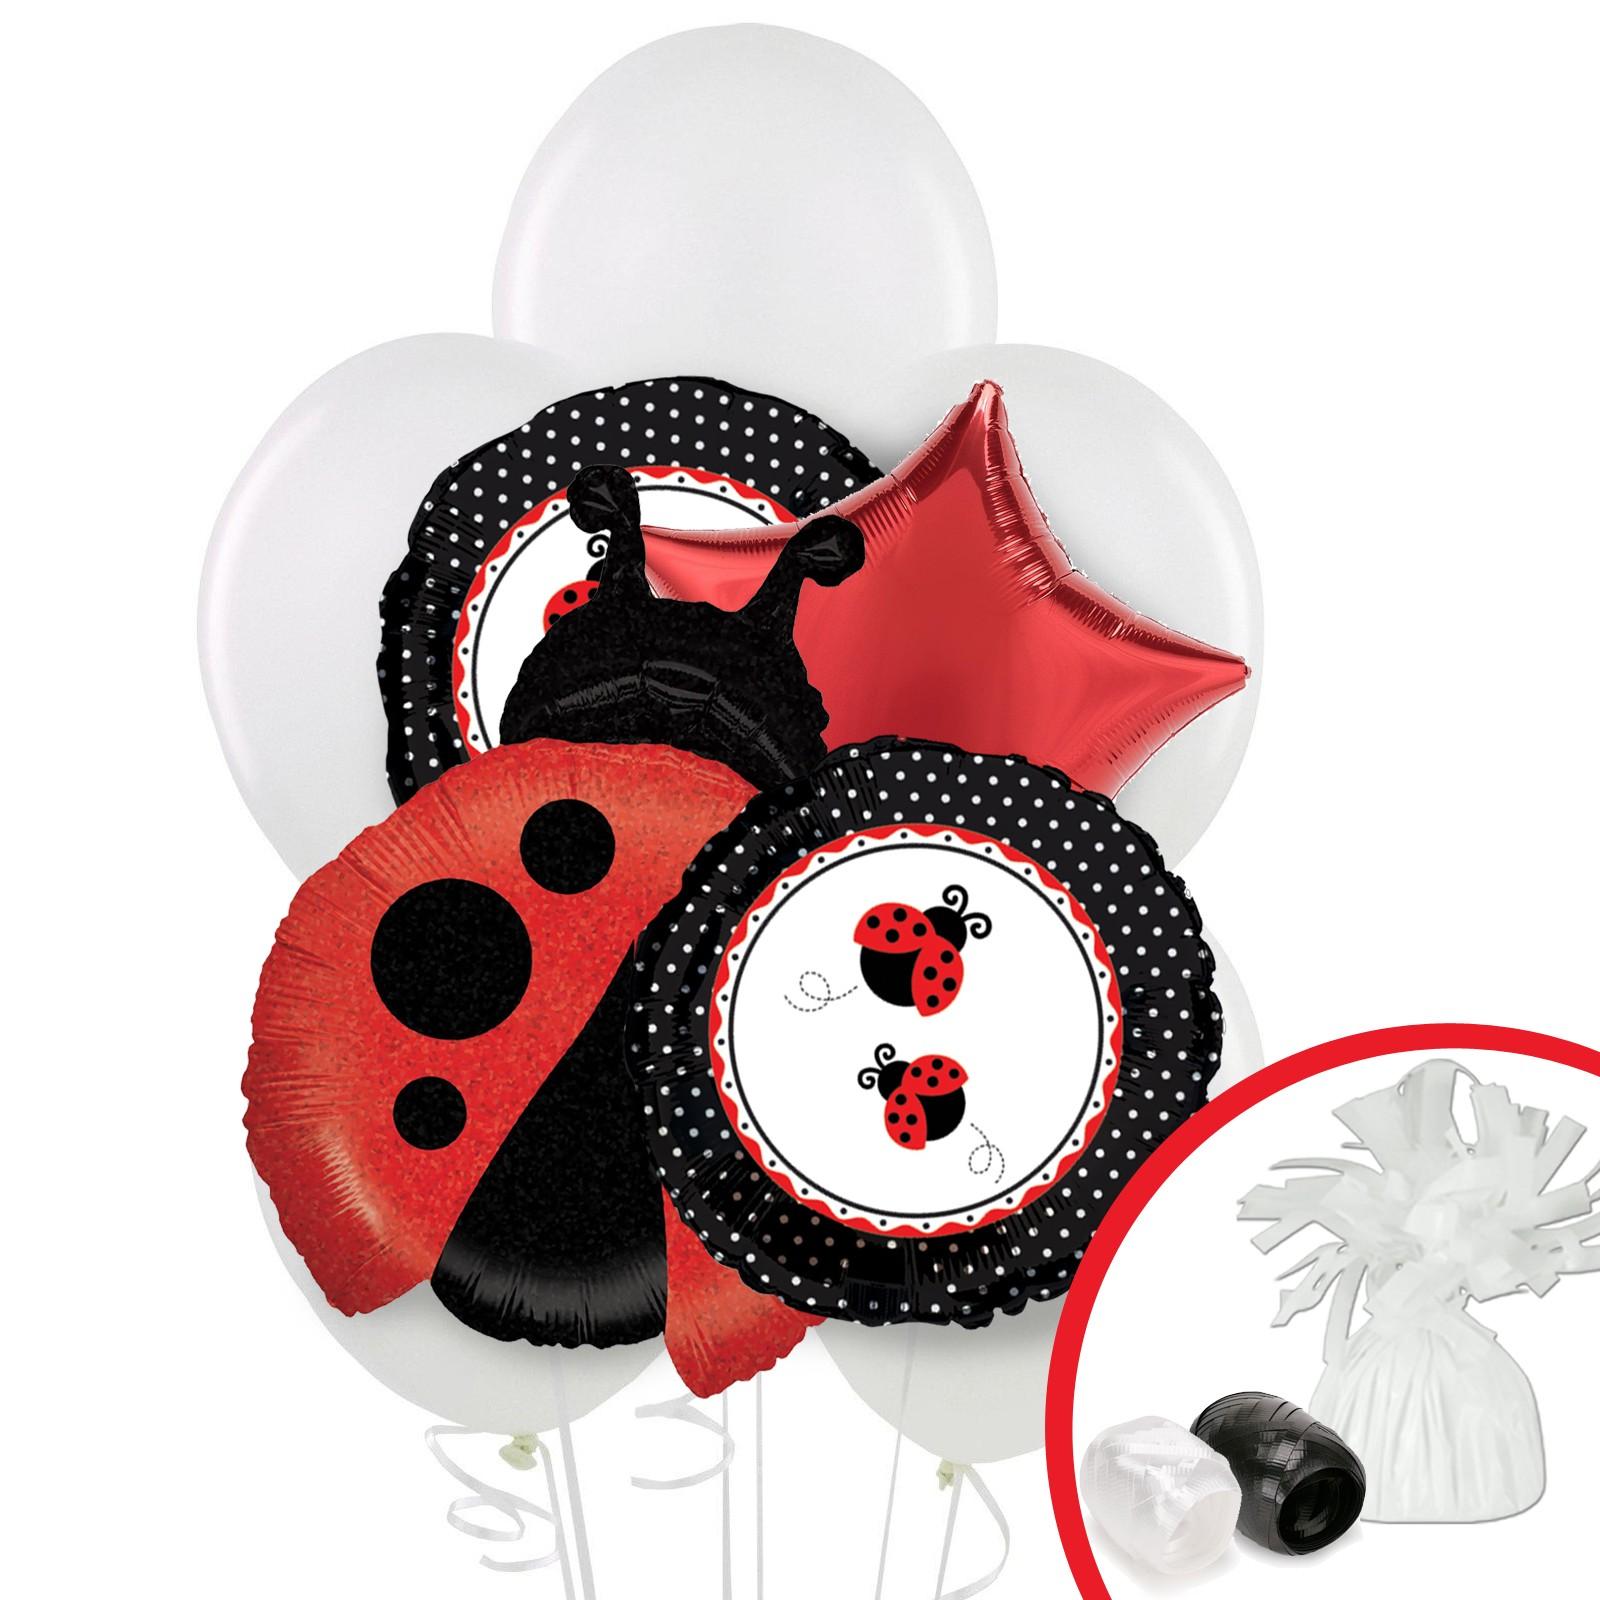 Ladybug Fancy Balloon Bouquet: Ladybug First Birthday Party Decorations for Your Little Lady!